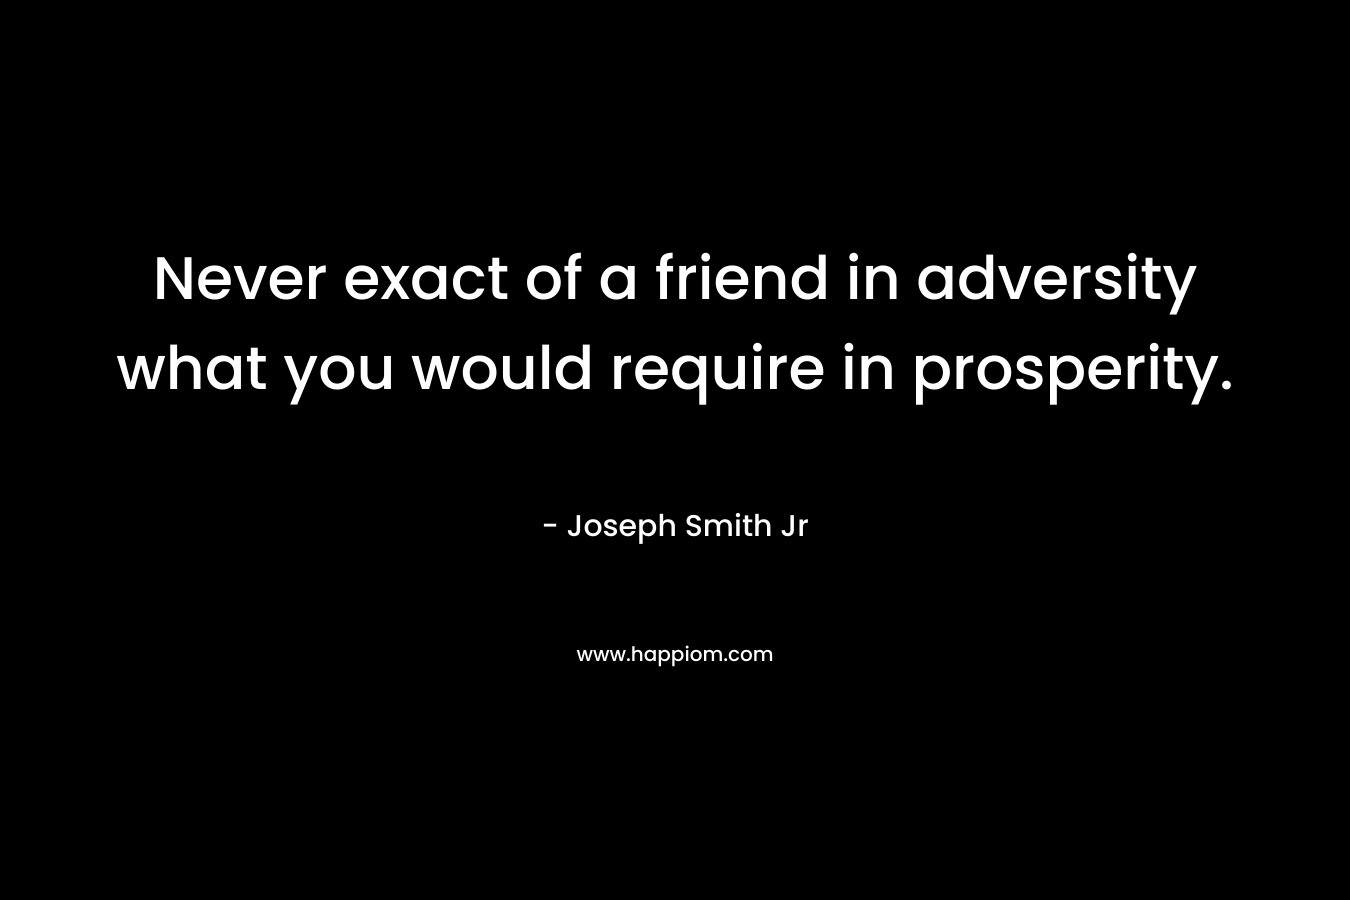 Never exact of a friend in adversity what you would require in prosperity.